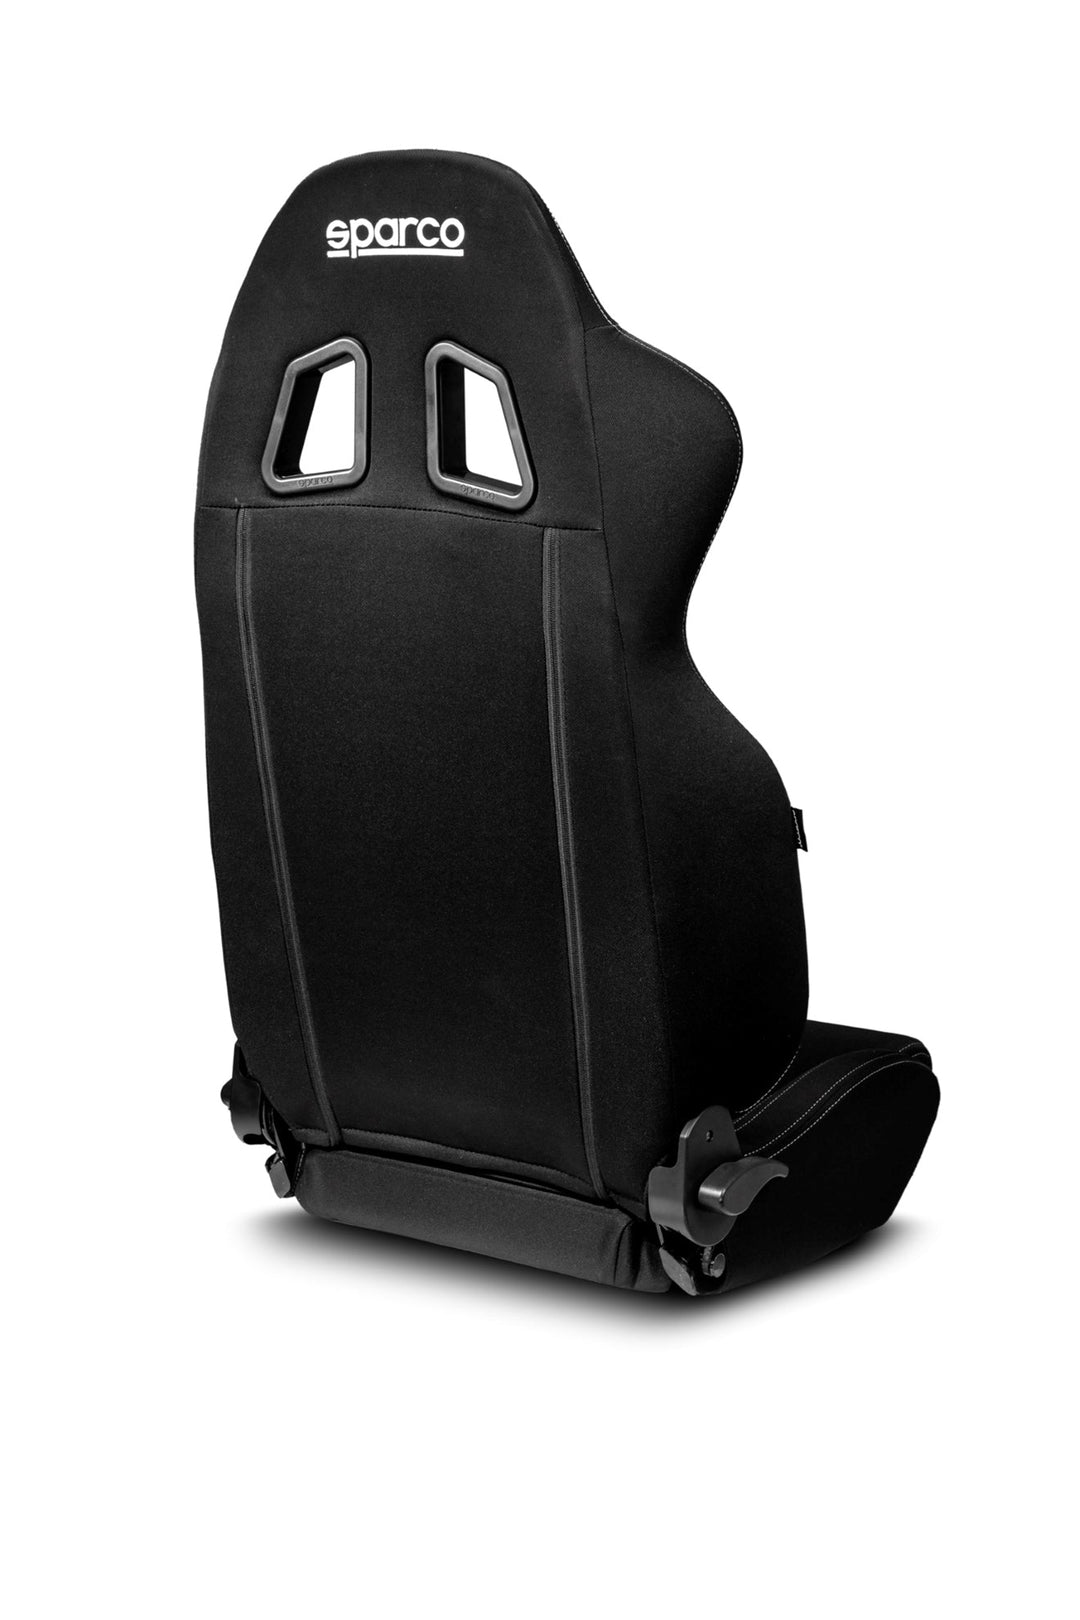 Sparco R100 Reclinable Steel Model Seat Black/Black - Universal - Dirty Racing Products